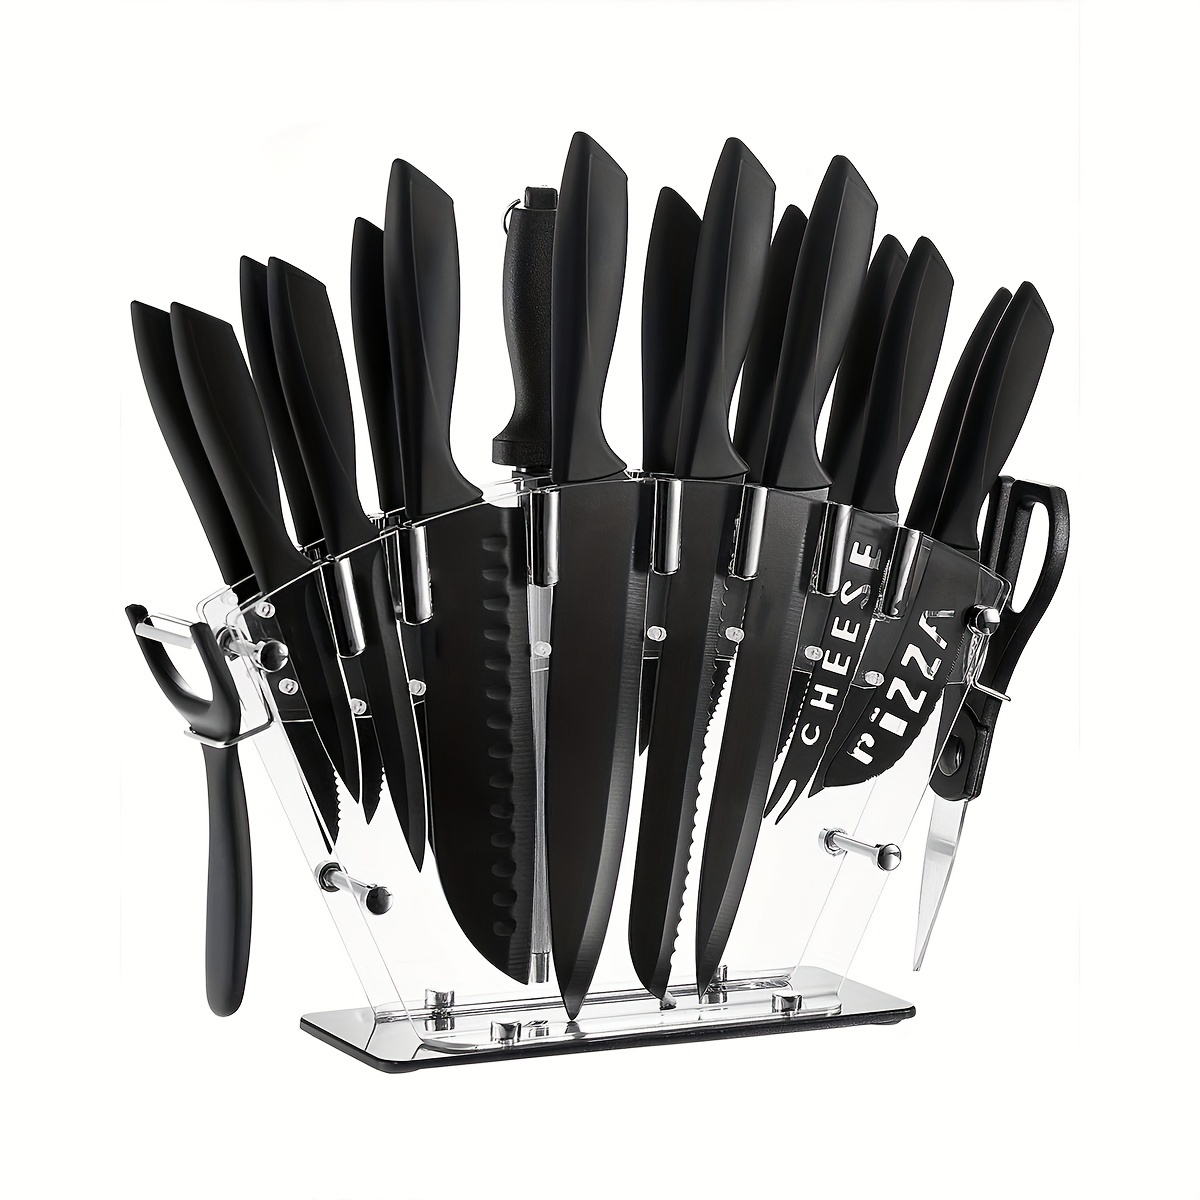 

Kitchen Knife Set With Block, 19 Pcs High Carbon Stainless Steel Sharp Includes Serrated Steak Knives Set, Chef Knives, Bread Knife, Scissor, Sharpener, All In 1